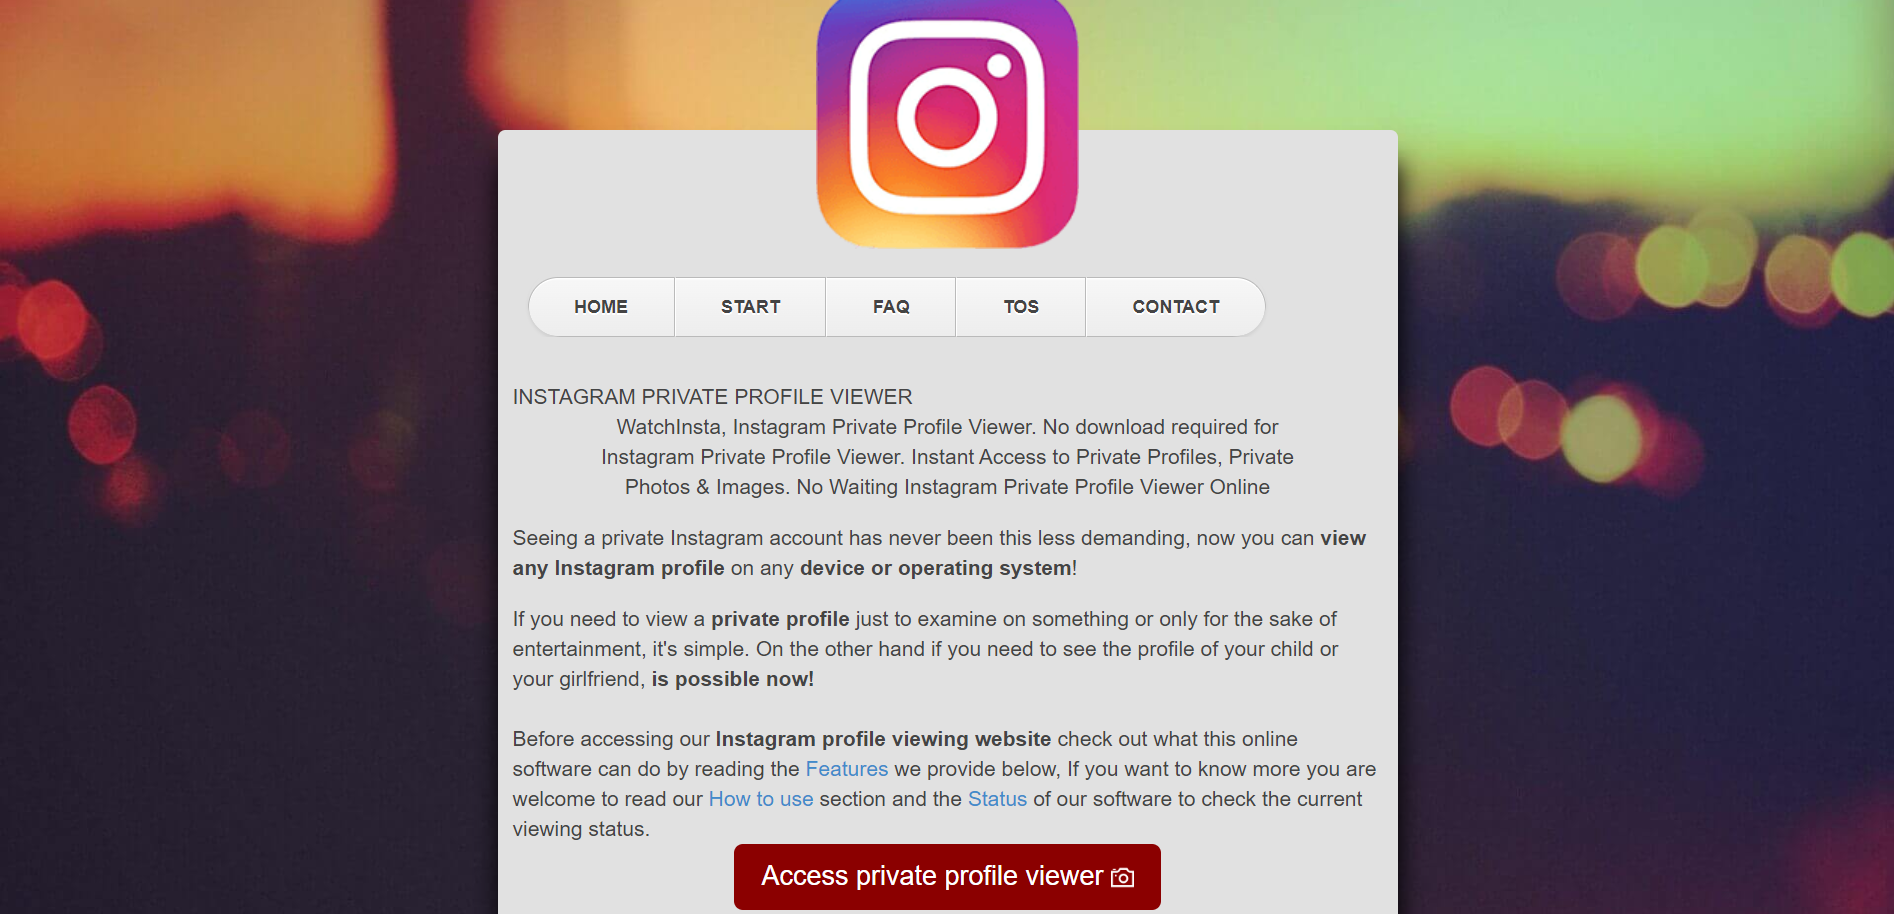 How To View Private Instagram Profiles - Watch Insta